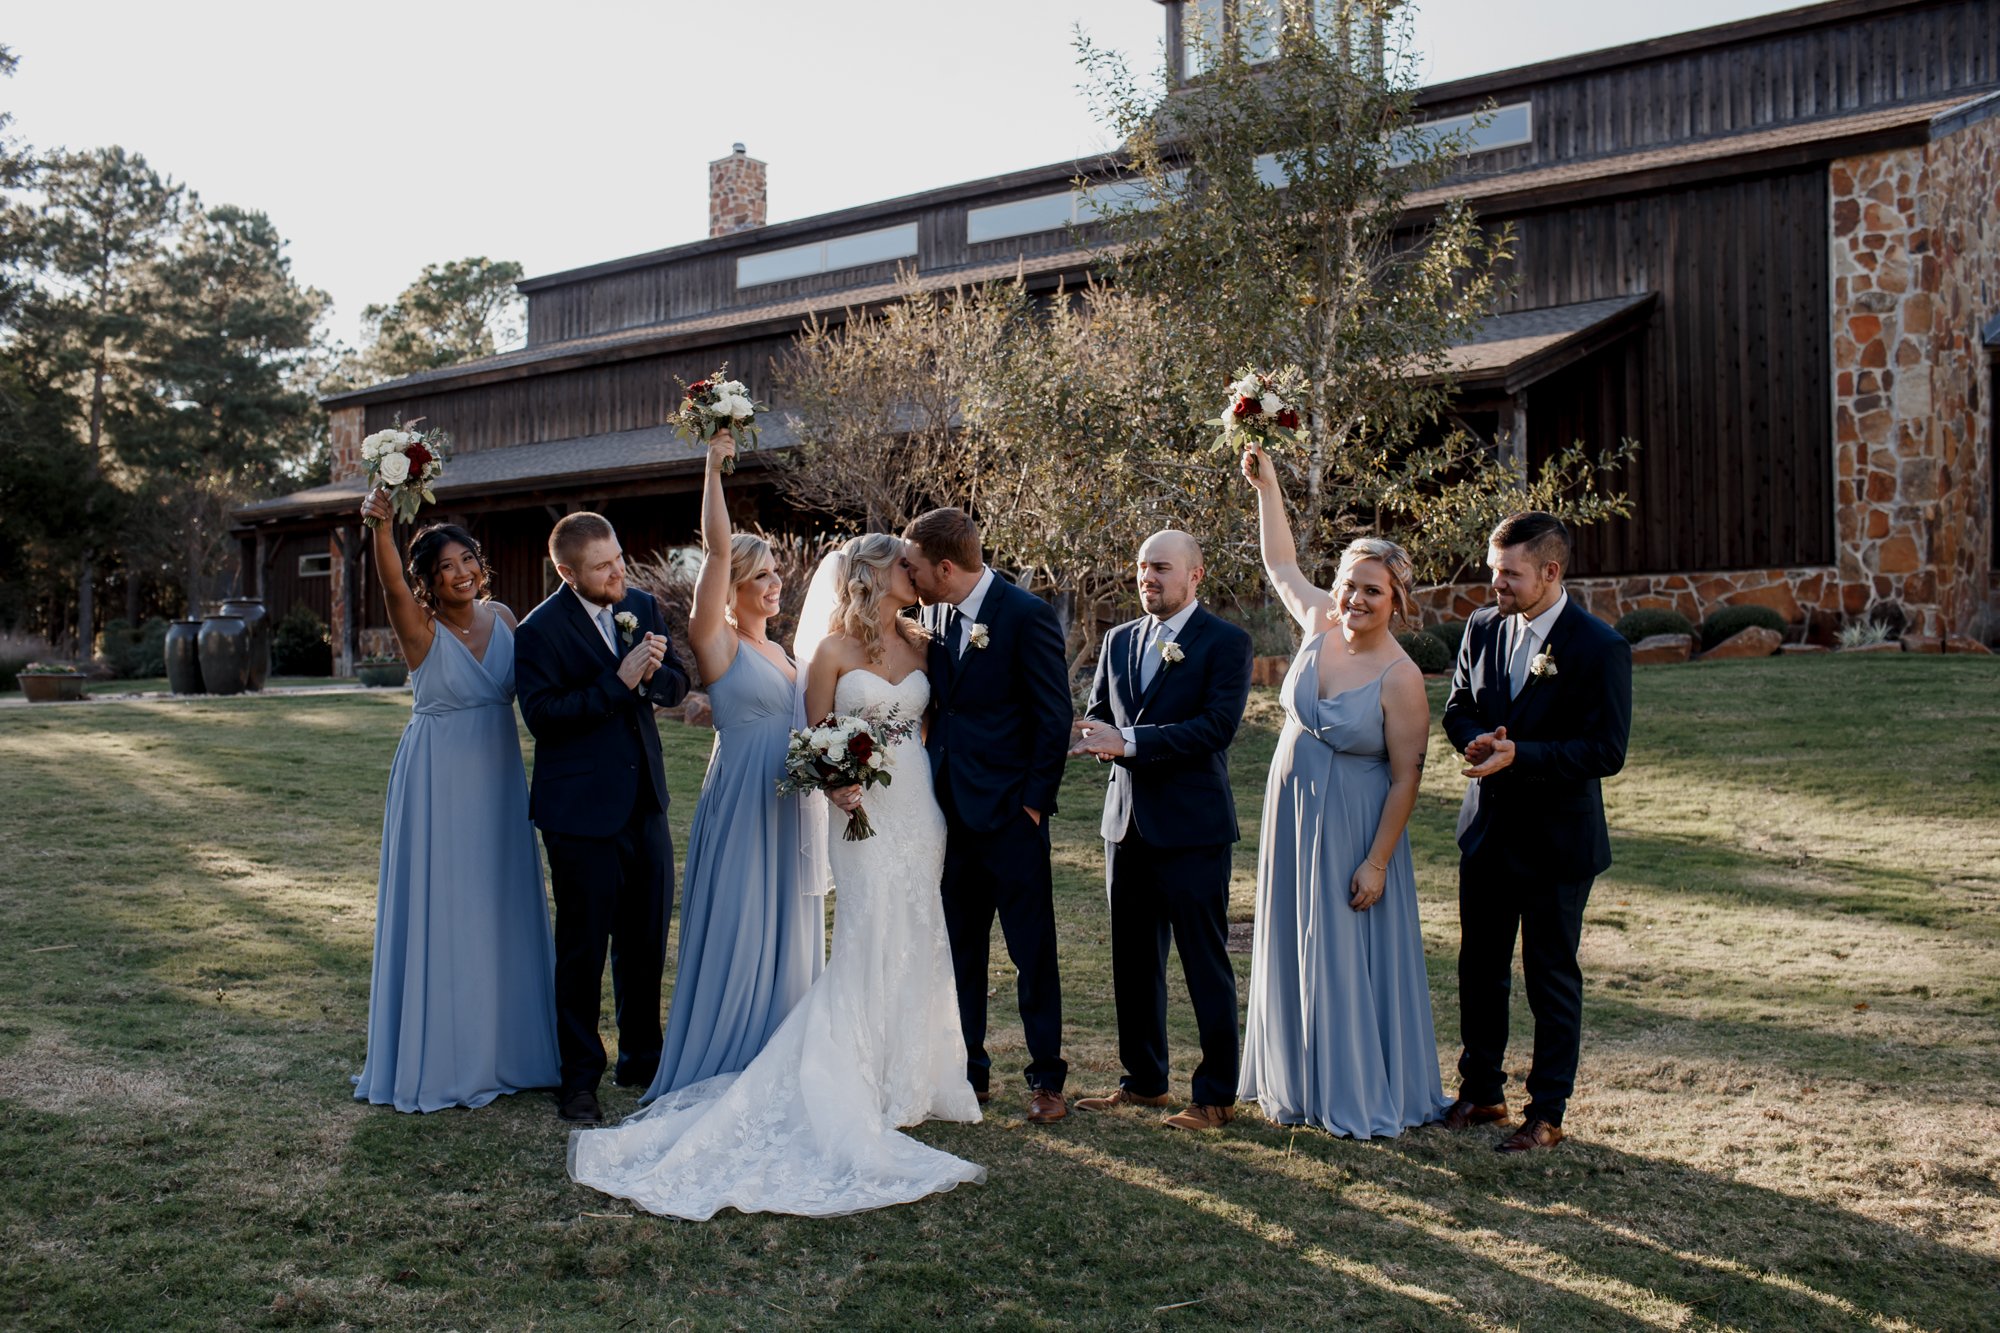 Bride and groom posing with bridal party. Wedding at The Vine (New Ulm, TX)